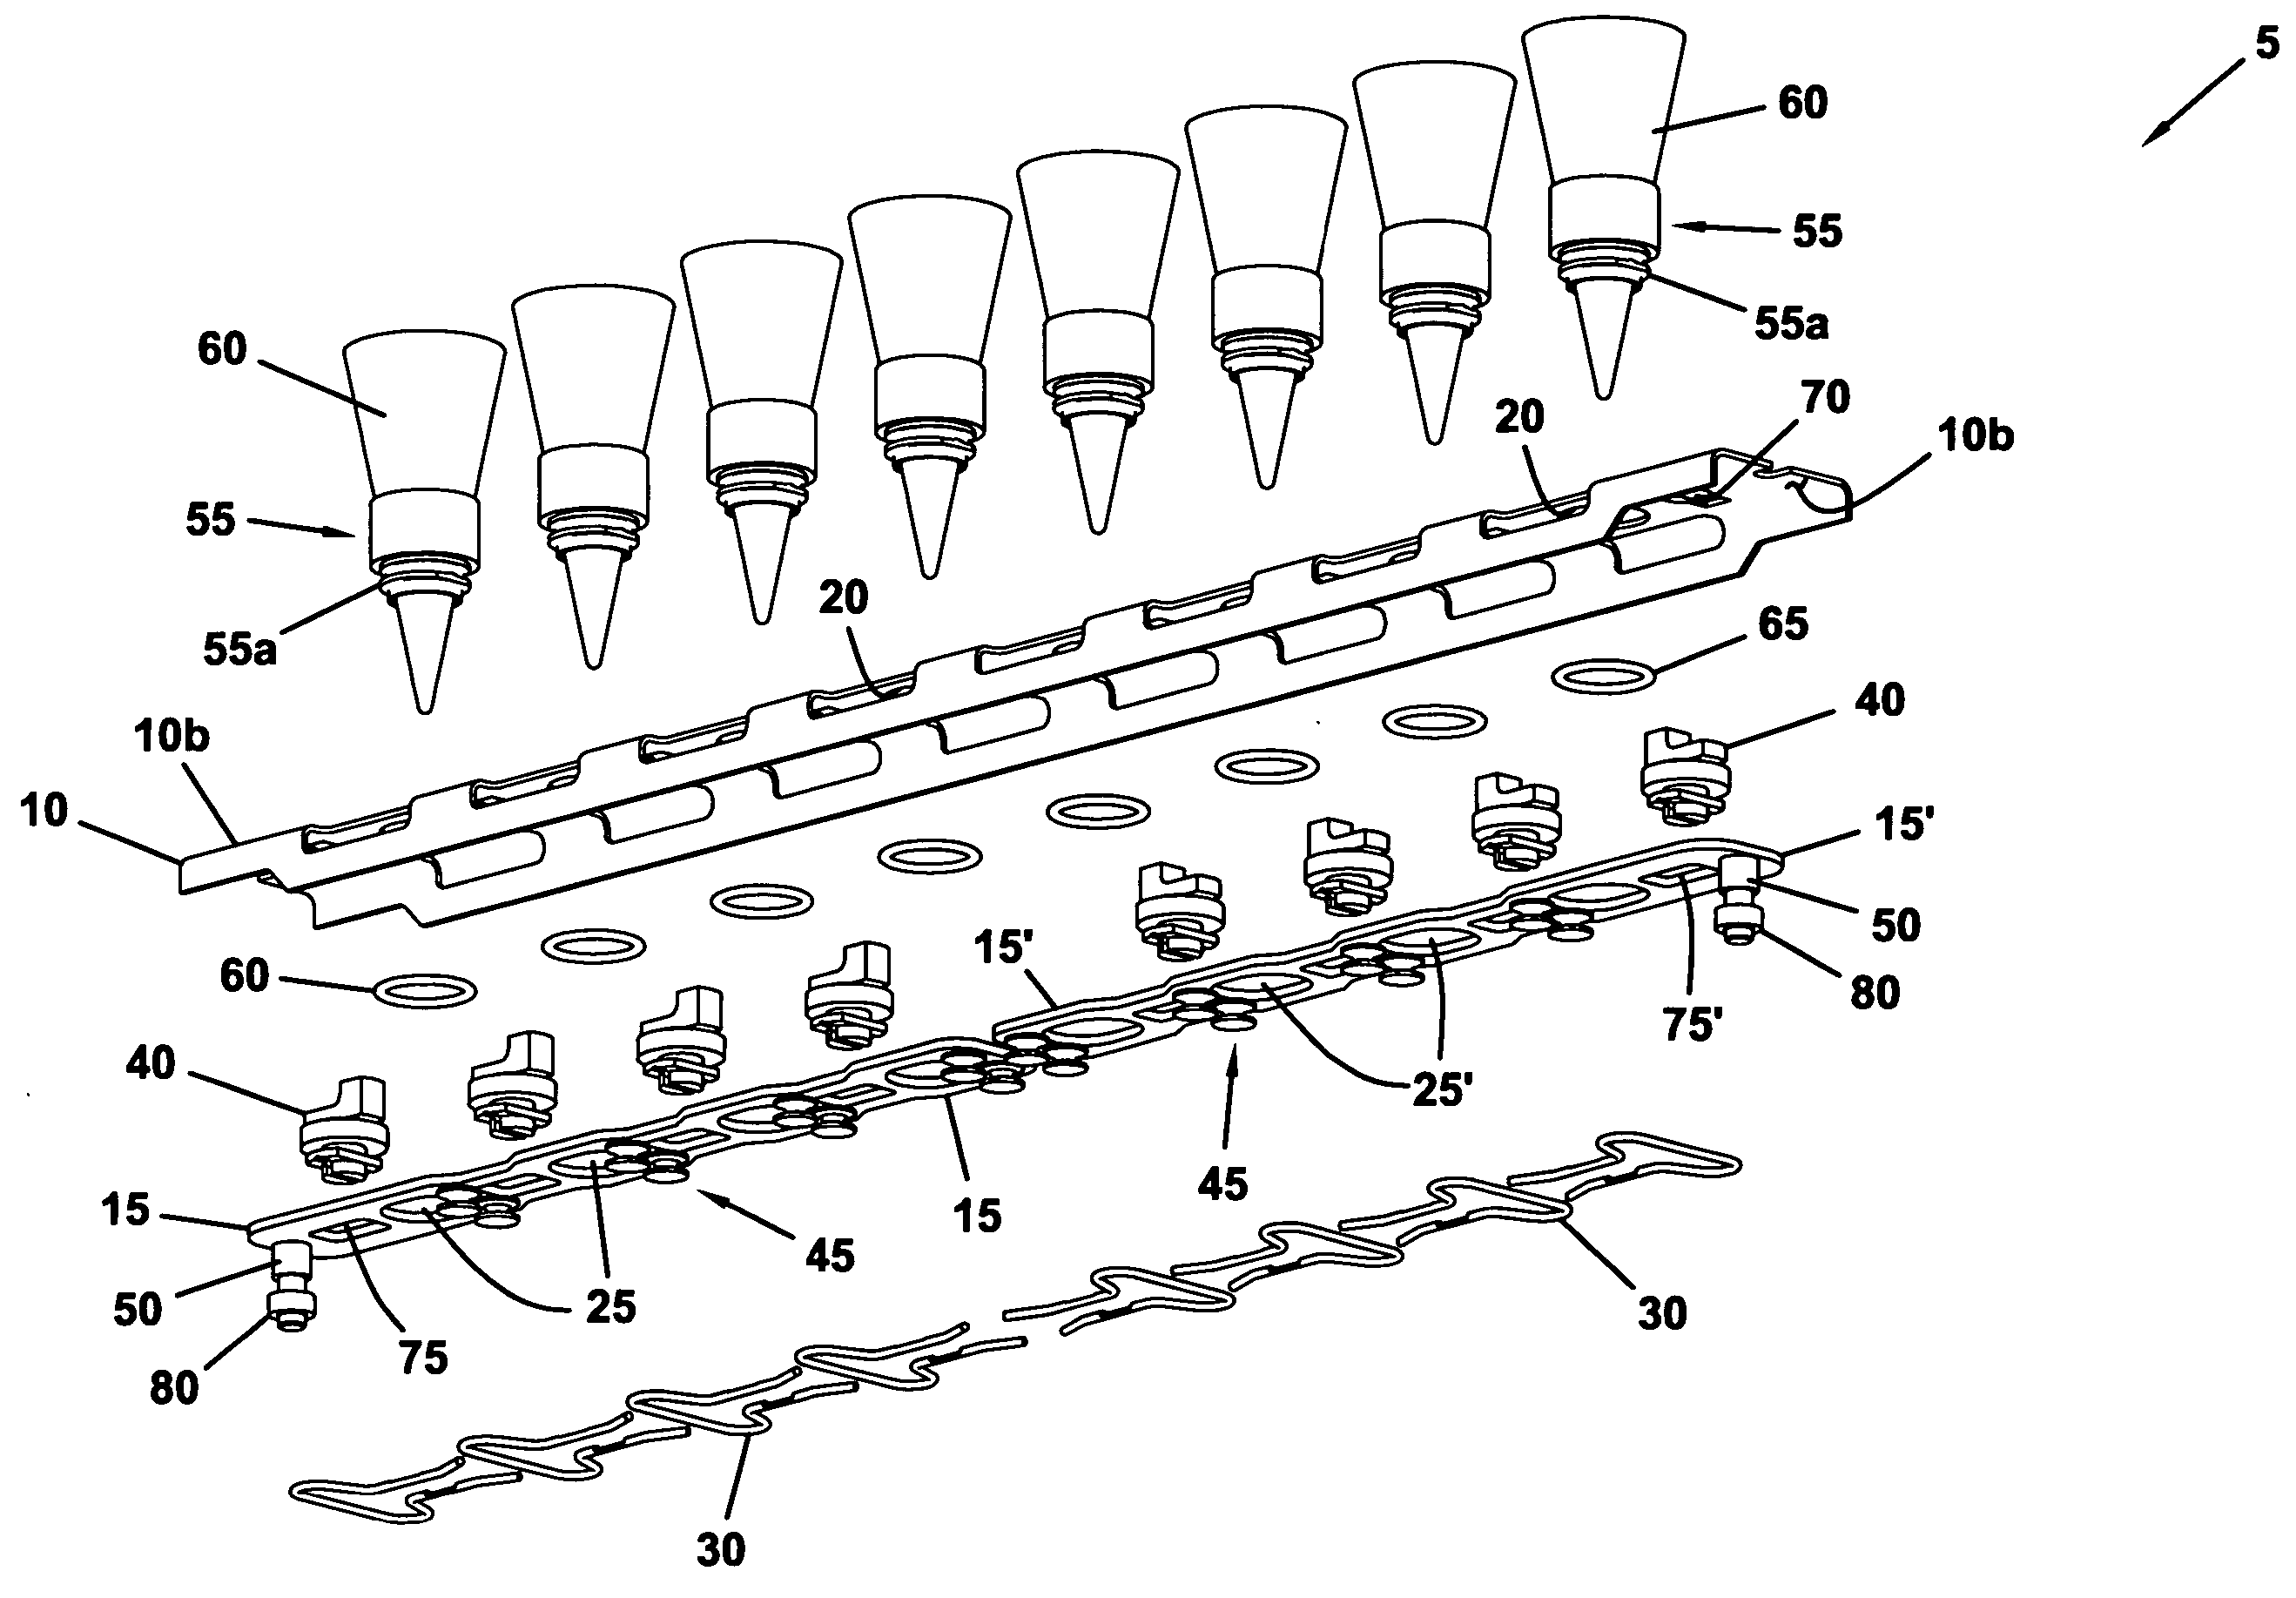 Modular and reconfigurable frozen cone confection manufacturing system and method